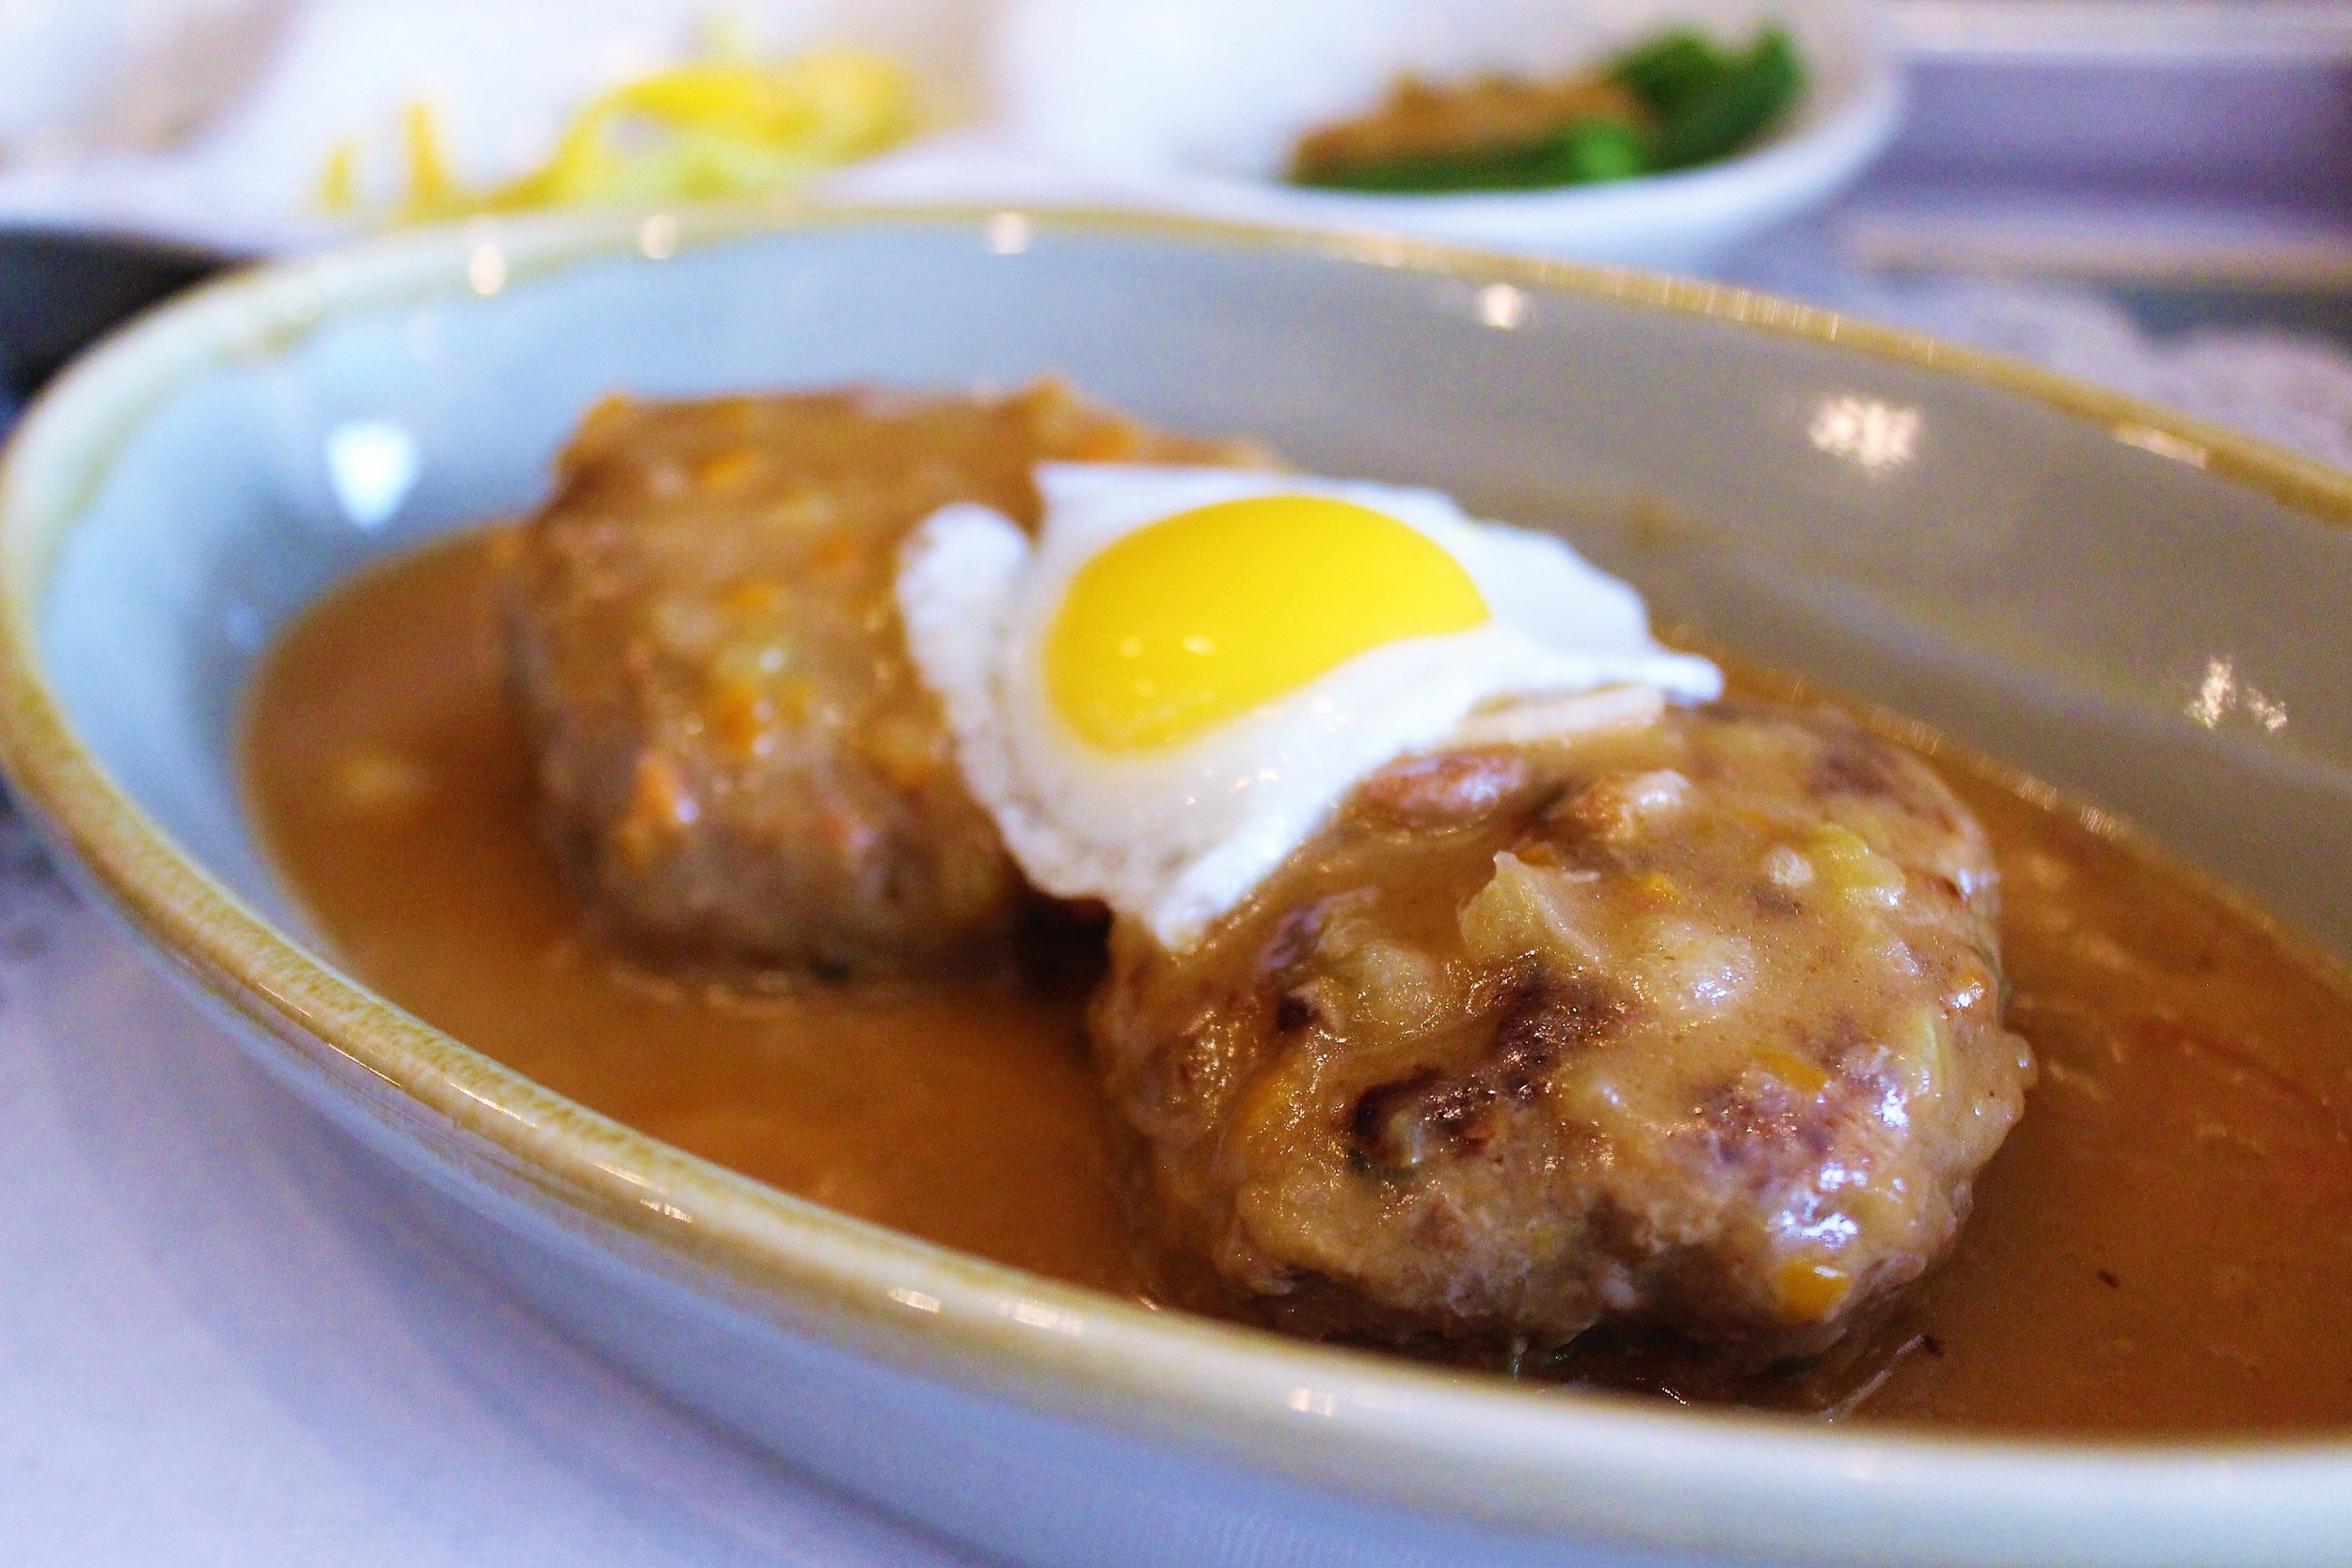 Hamburger Steak with Quail Egg at Her Name is Han in New York City